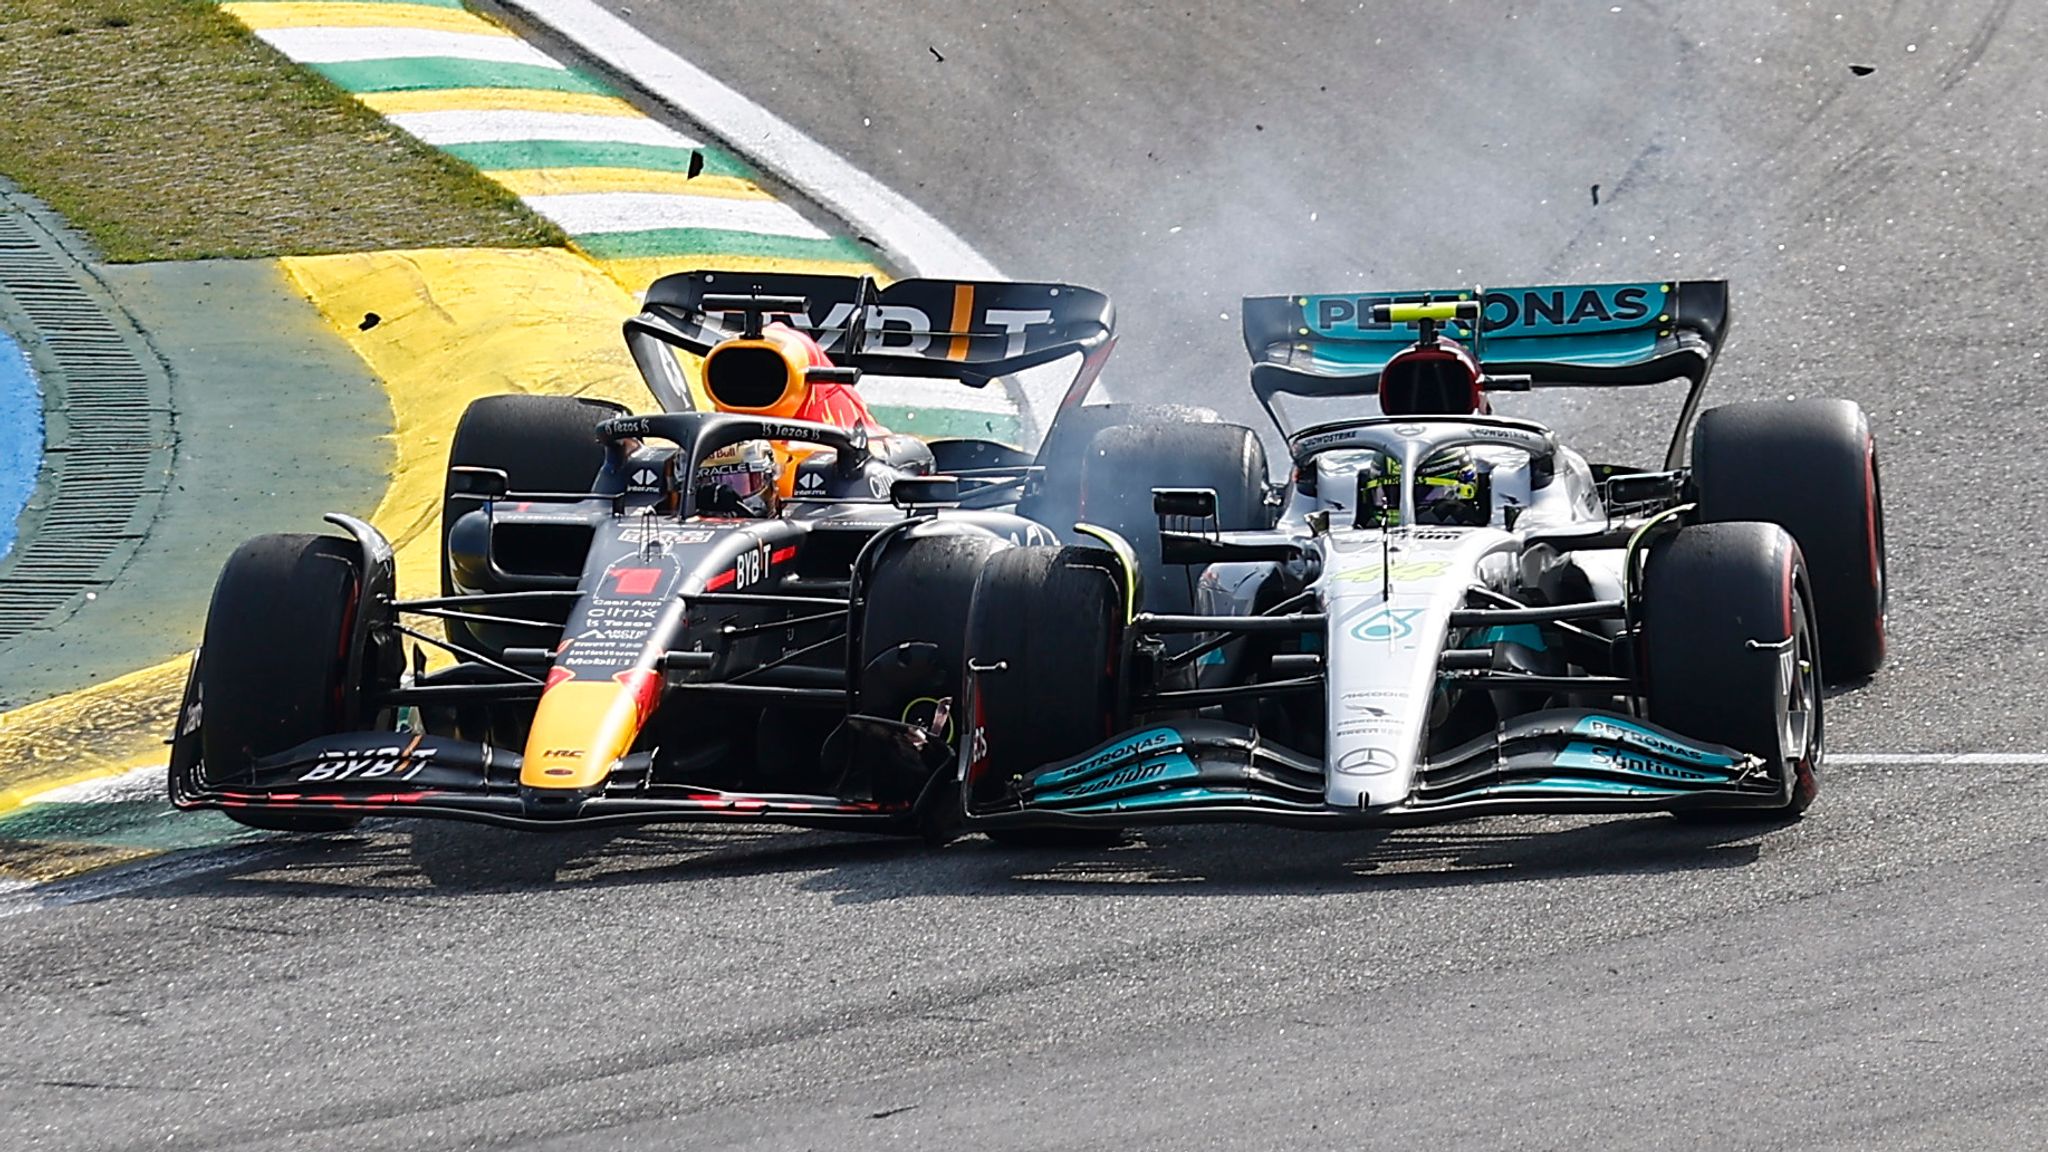 Sao Paulo Grand Prix Lewis Hamilton not concerned about racing with Max Verstappen in future after collision F1 News